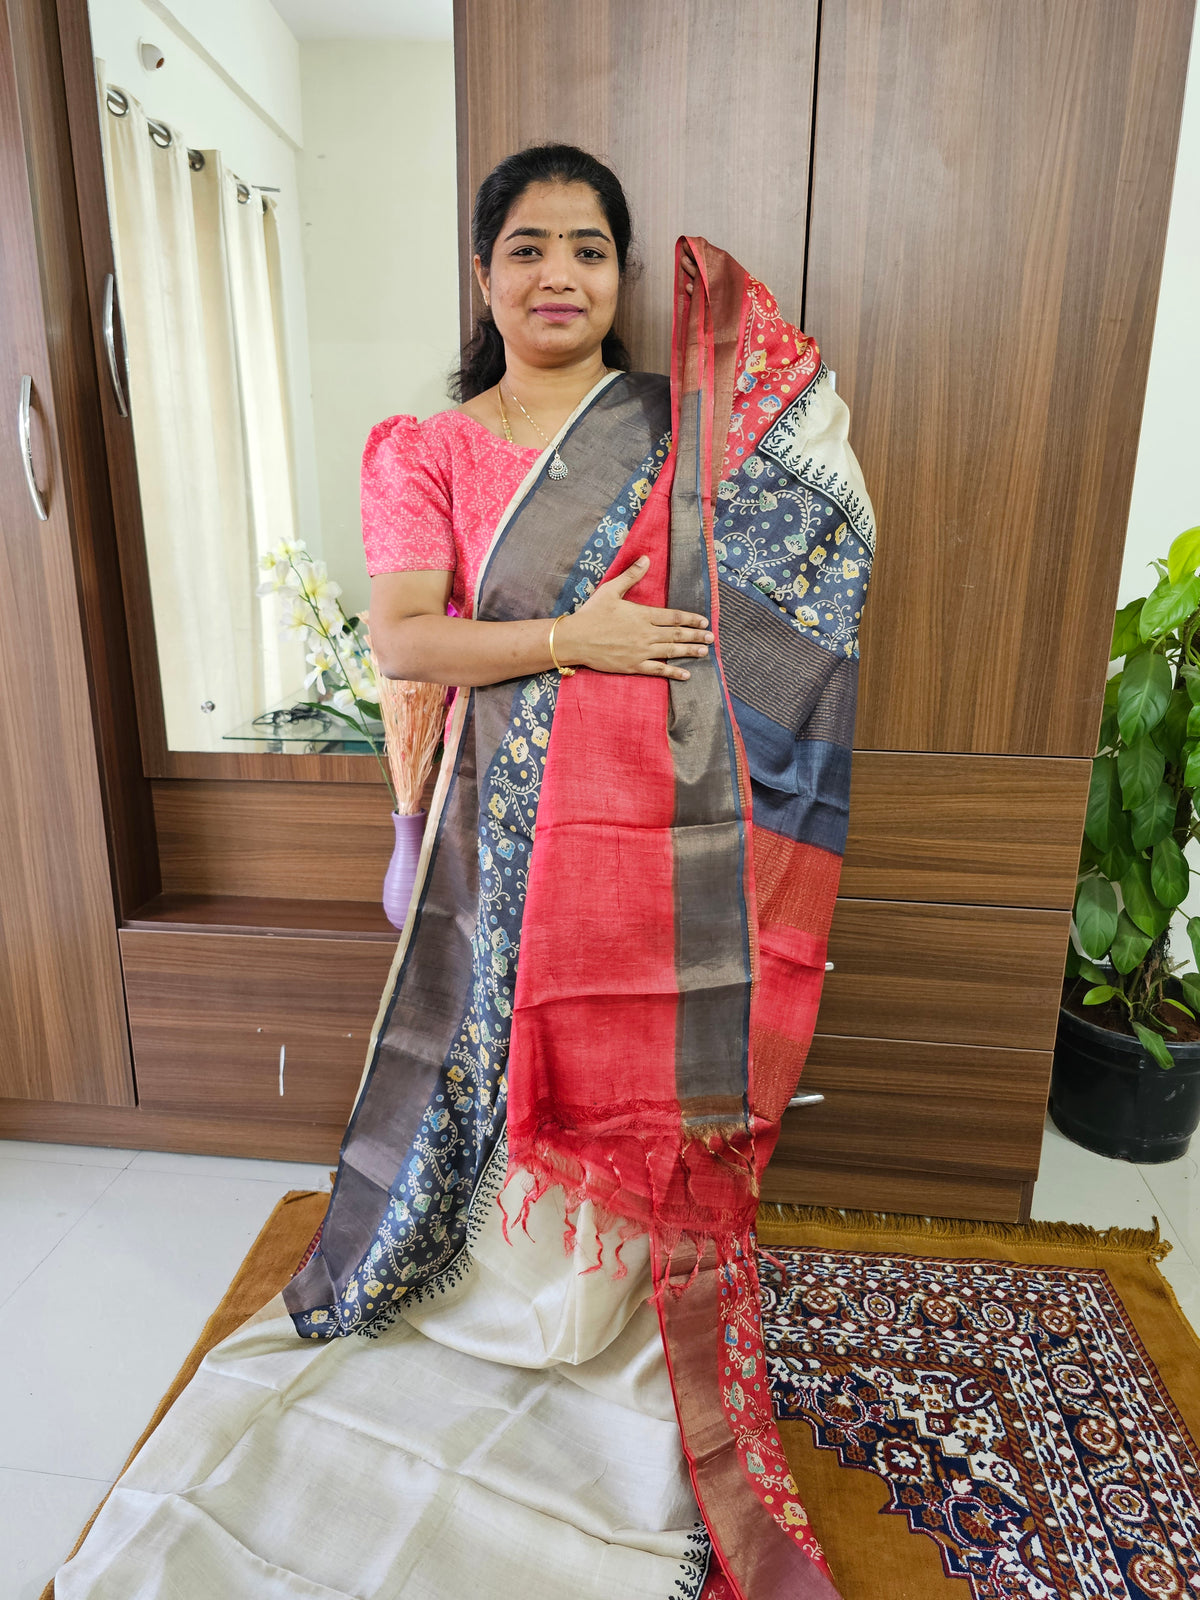 Cream with Black and Red Handwoven Tussar Silk Saree with Zari Border